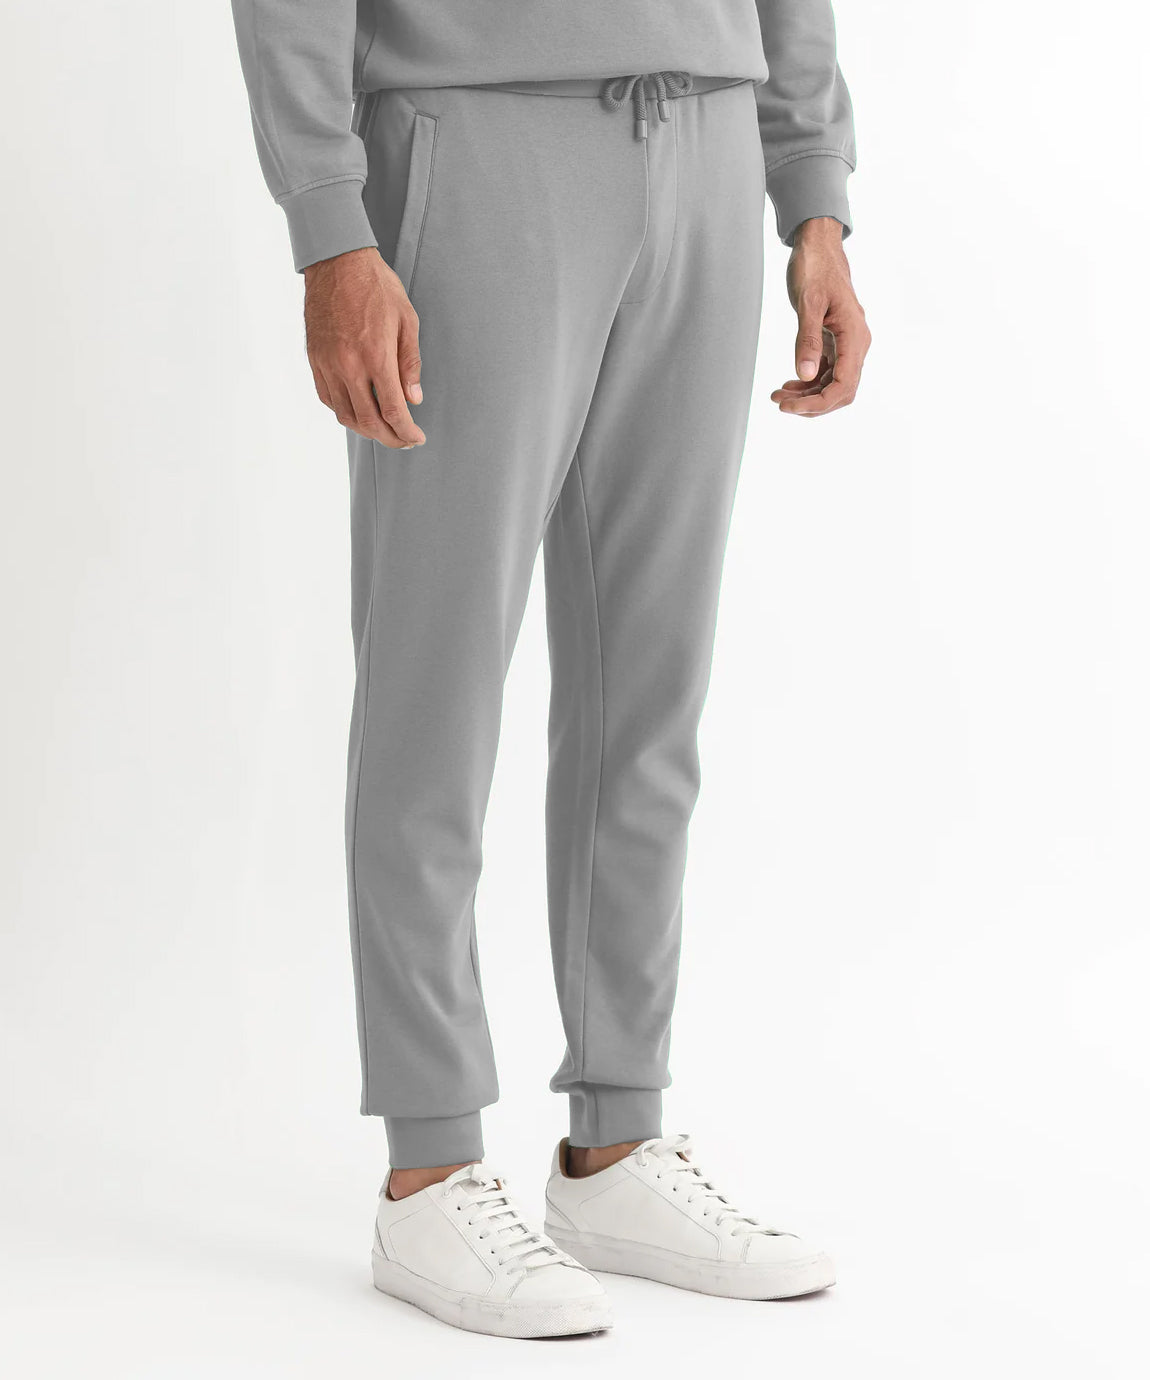 Mens Premium 100% Cotton Loopknit Track Pant With Bottom Cuff